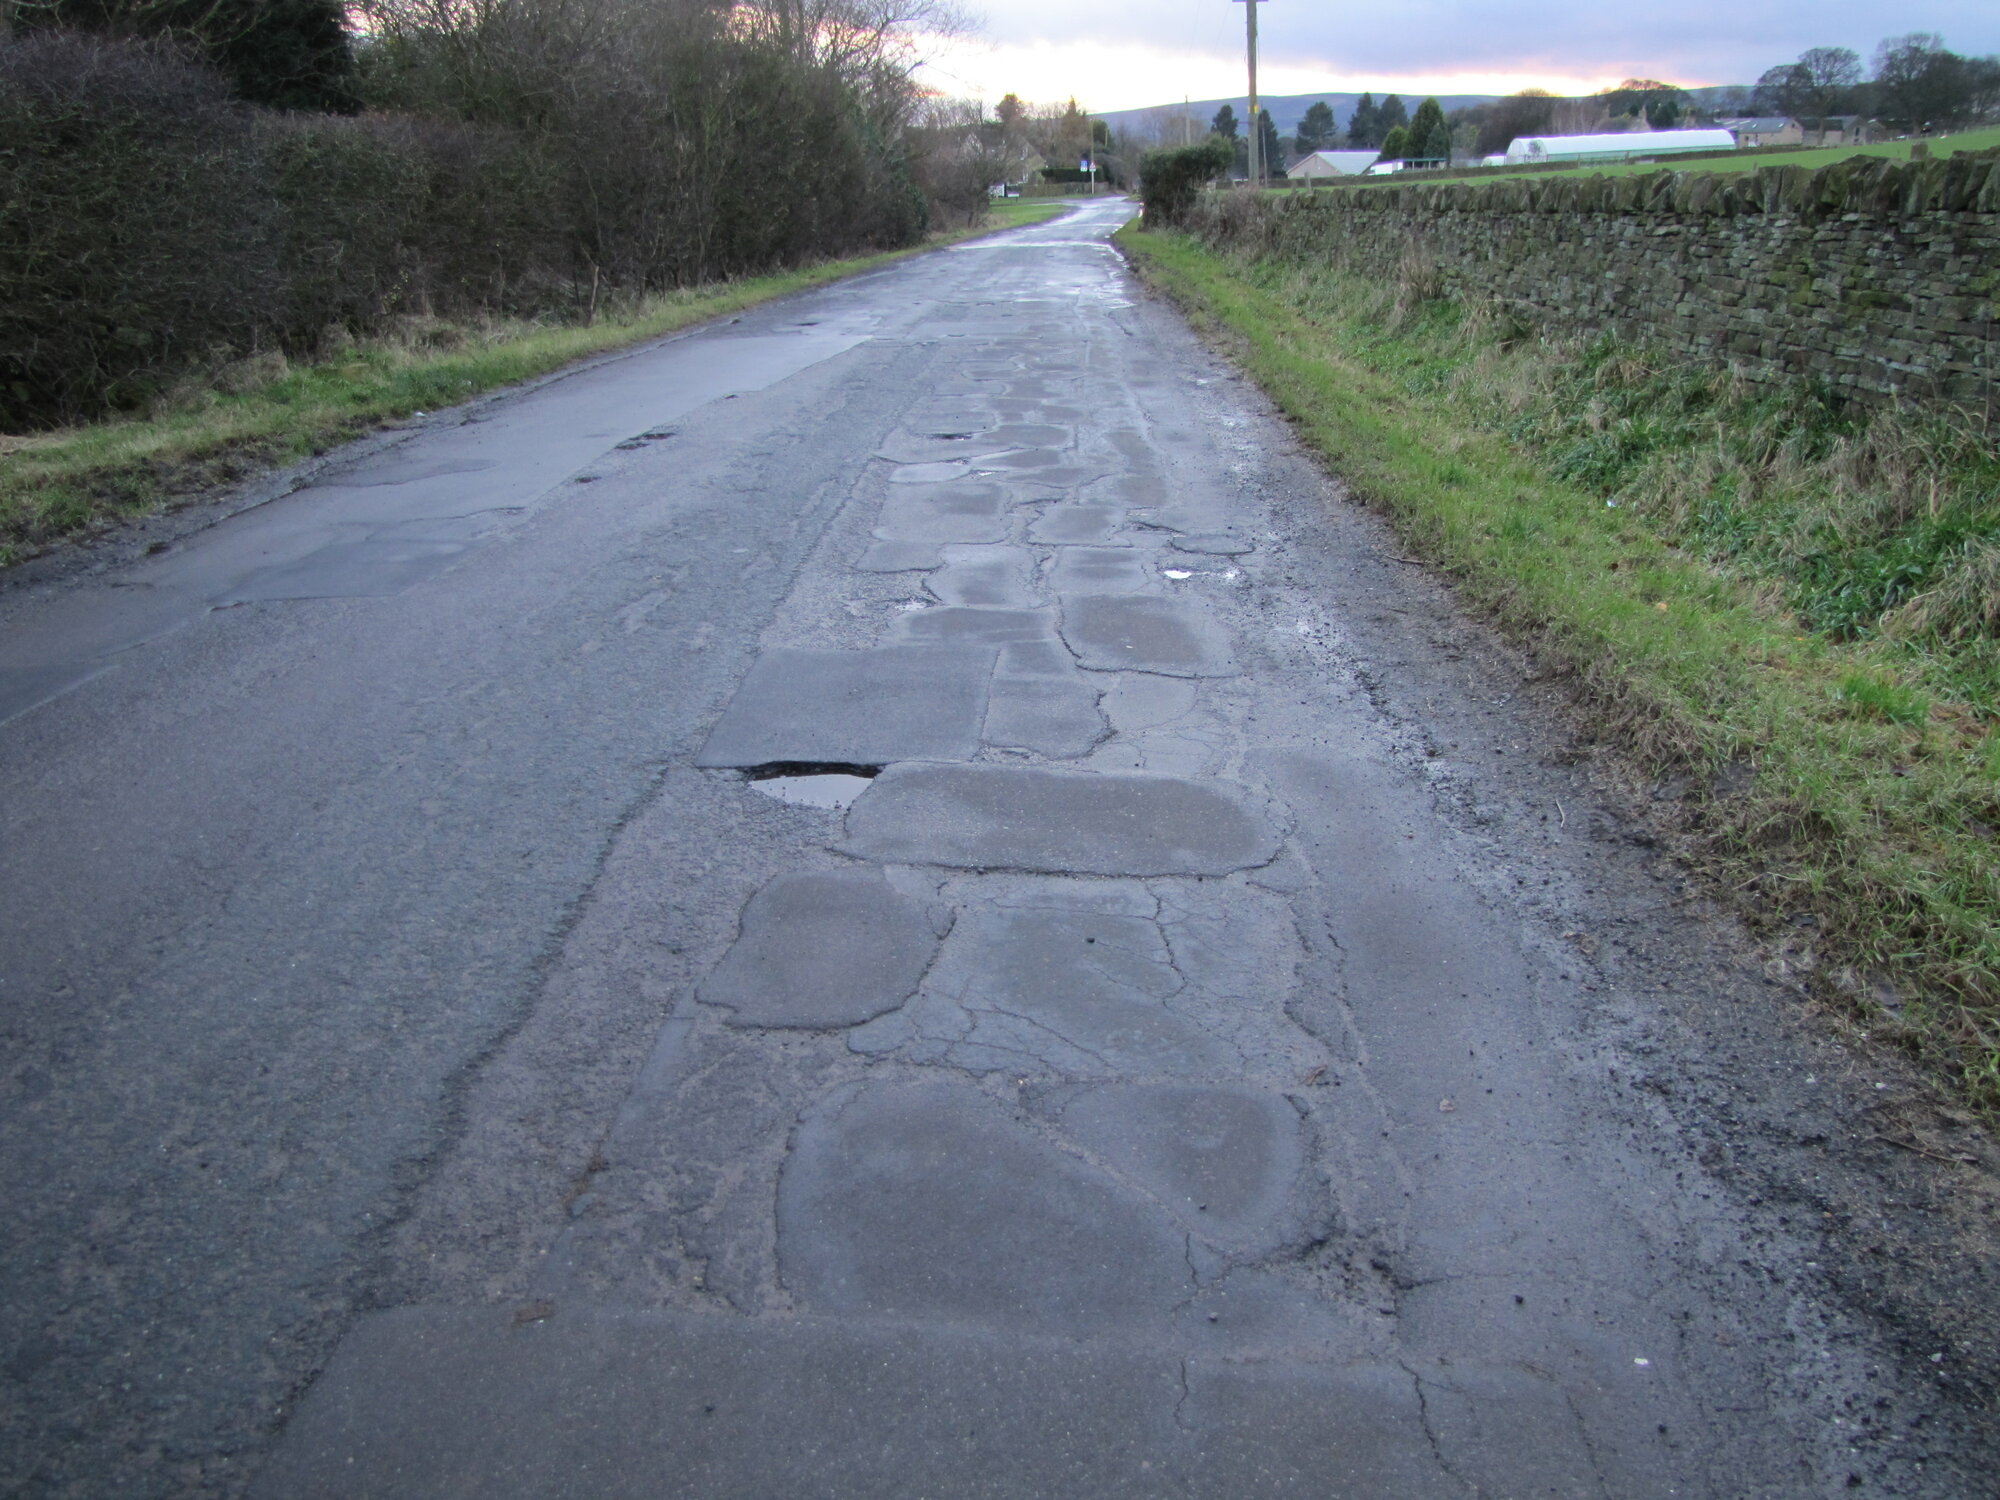 Pot_Holes_and_Patch_Repairs_on_the_Roads,_Sheffield_-_geograph.org.uk_-_3807006.jpg